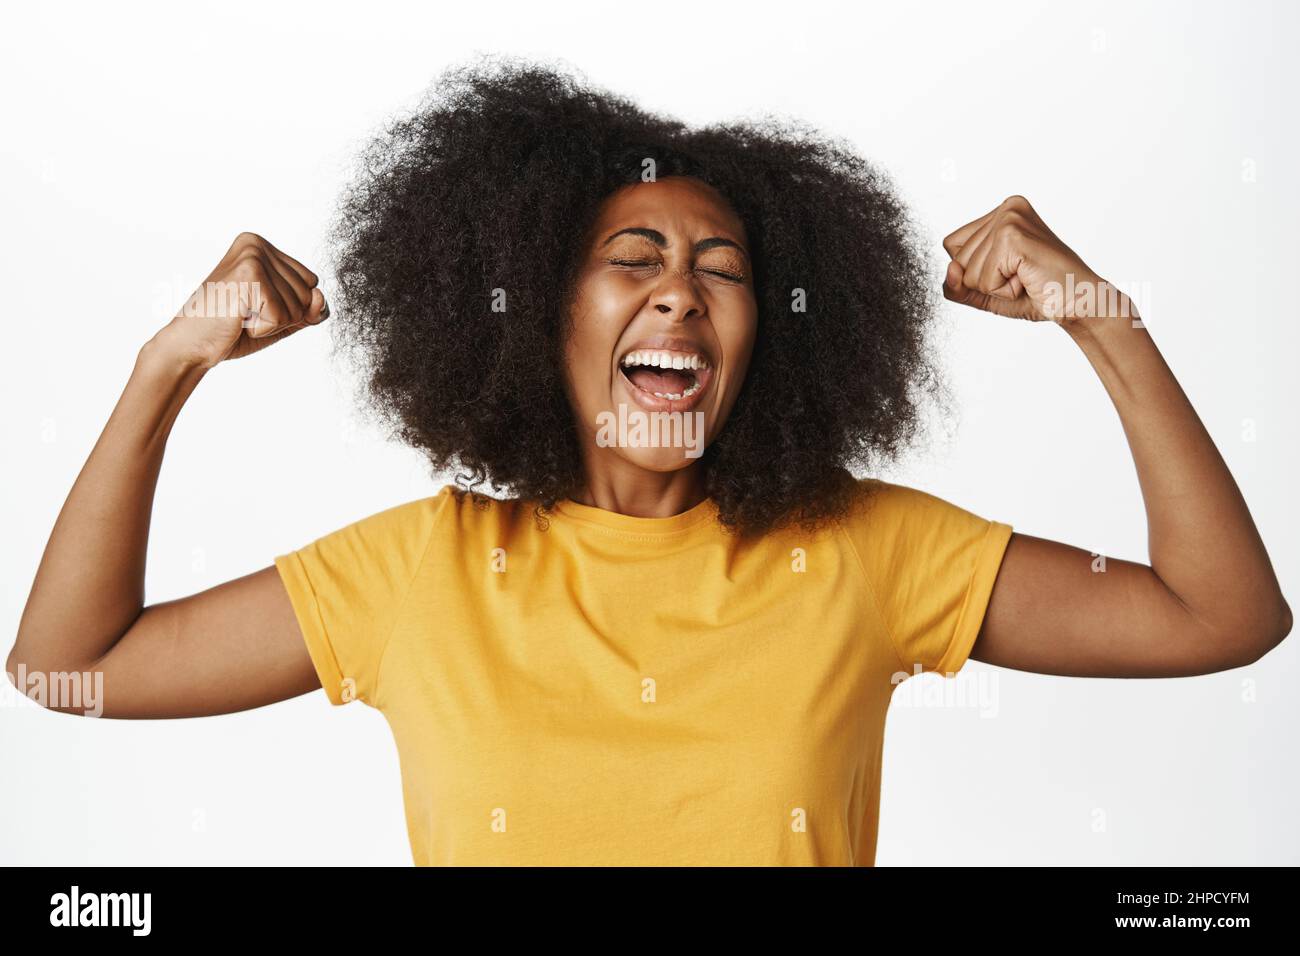 Close up portrait of enthusiastic black woman shouts with joy, flexing biceps and muscles, feeling strong and powerful, standing over white background Stock Photo